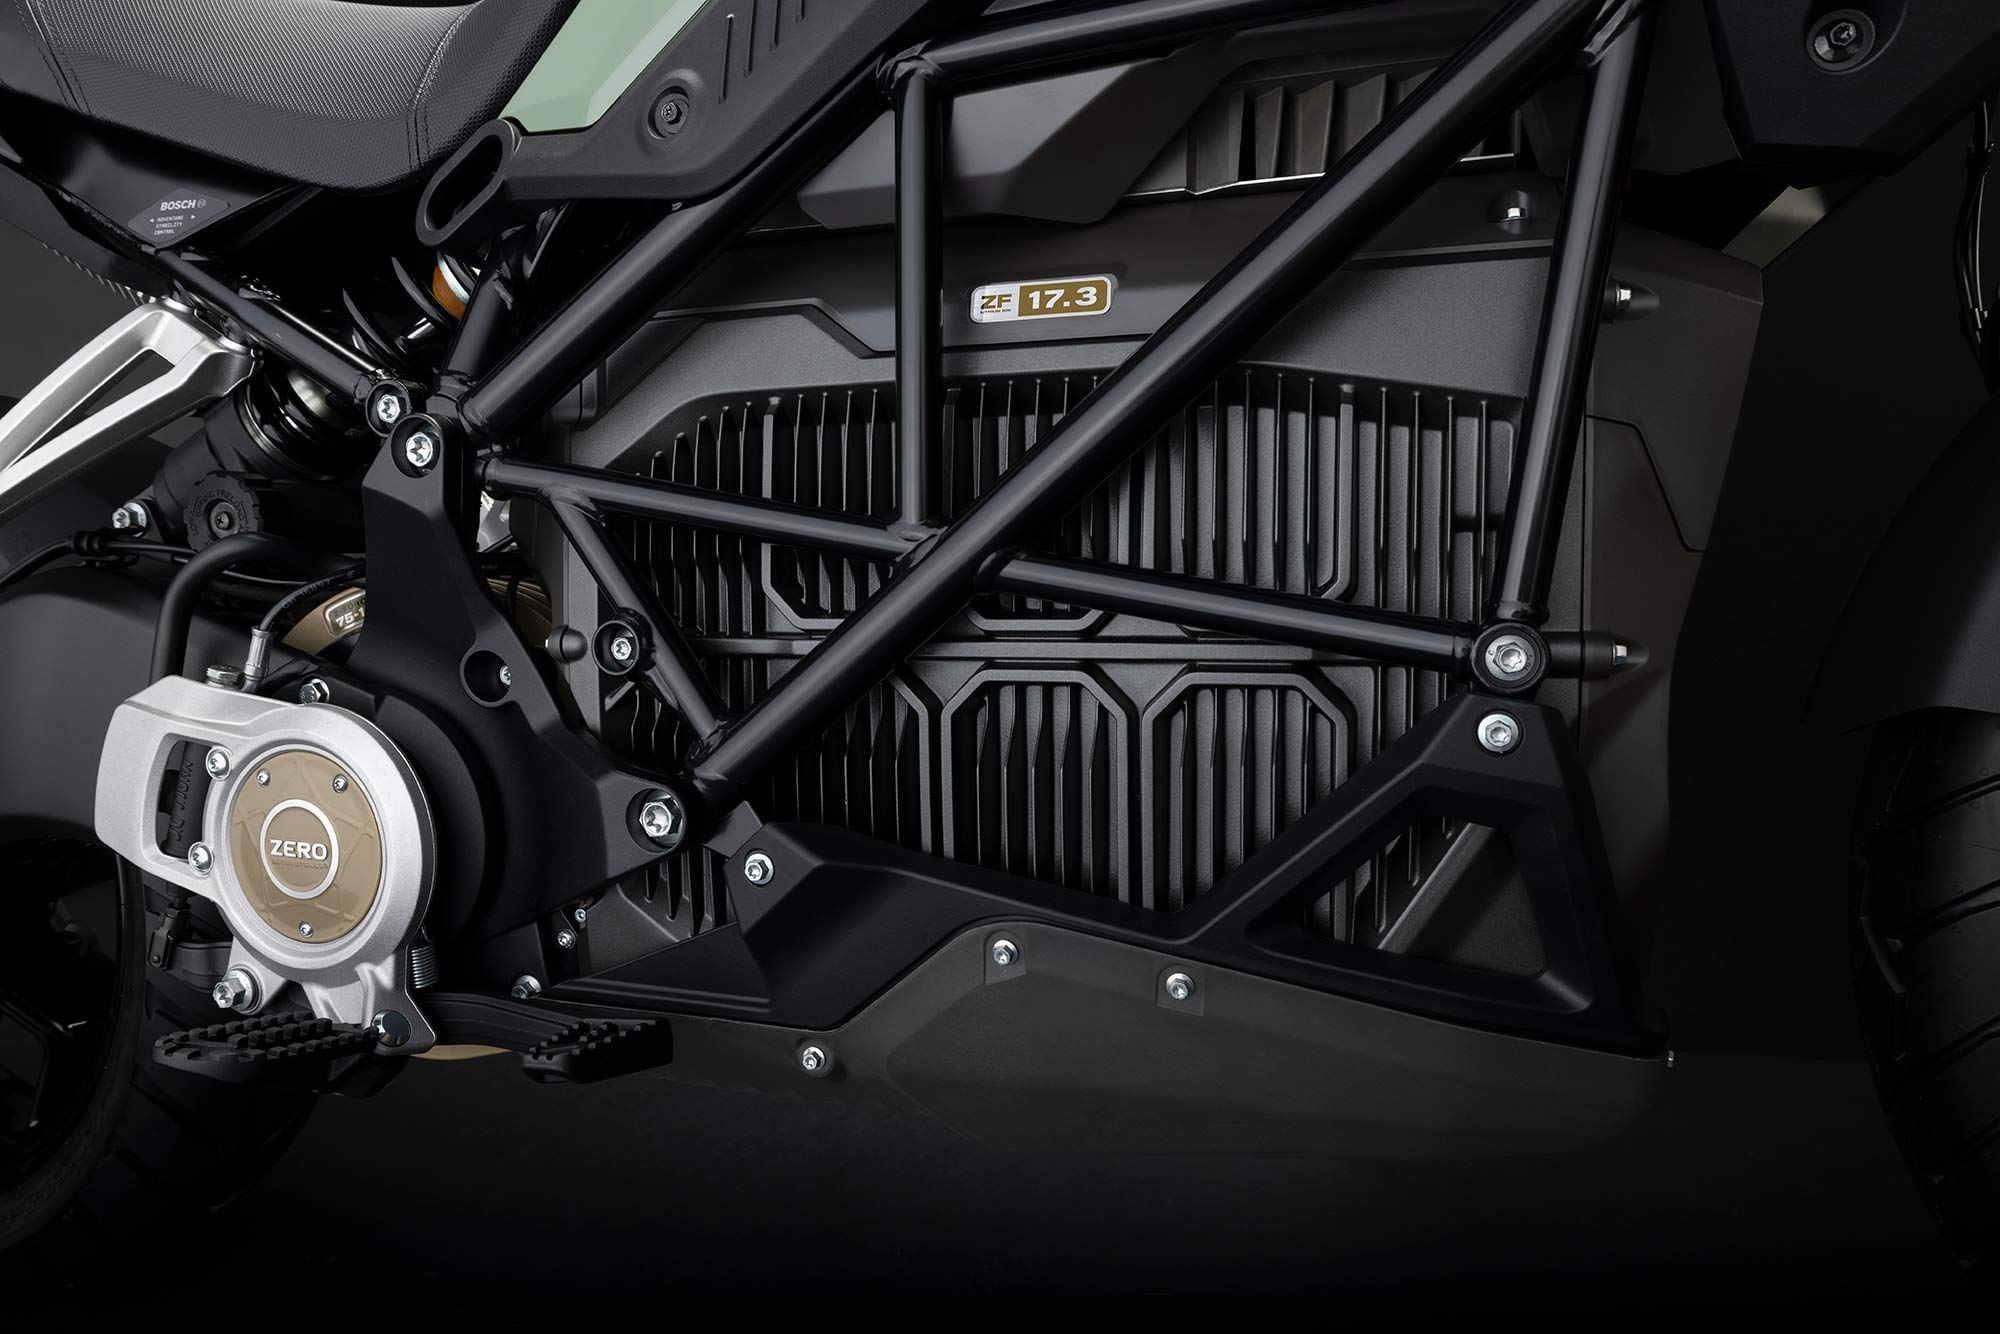 Rated with a nominal capacity of 17.3kWh, the battery of the DSR/X is the largest Zero has offered.